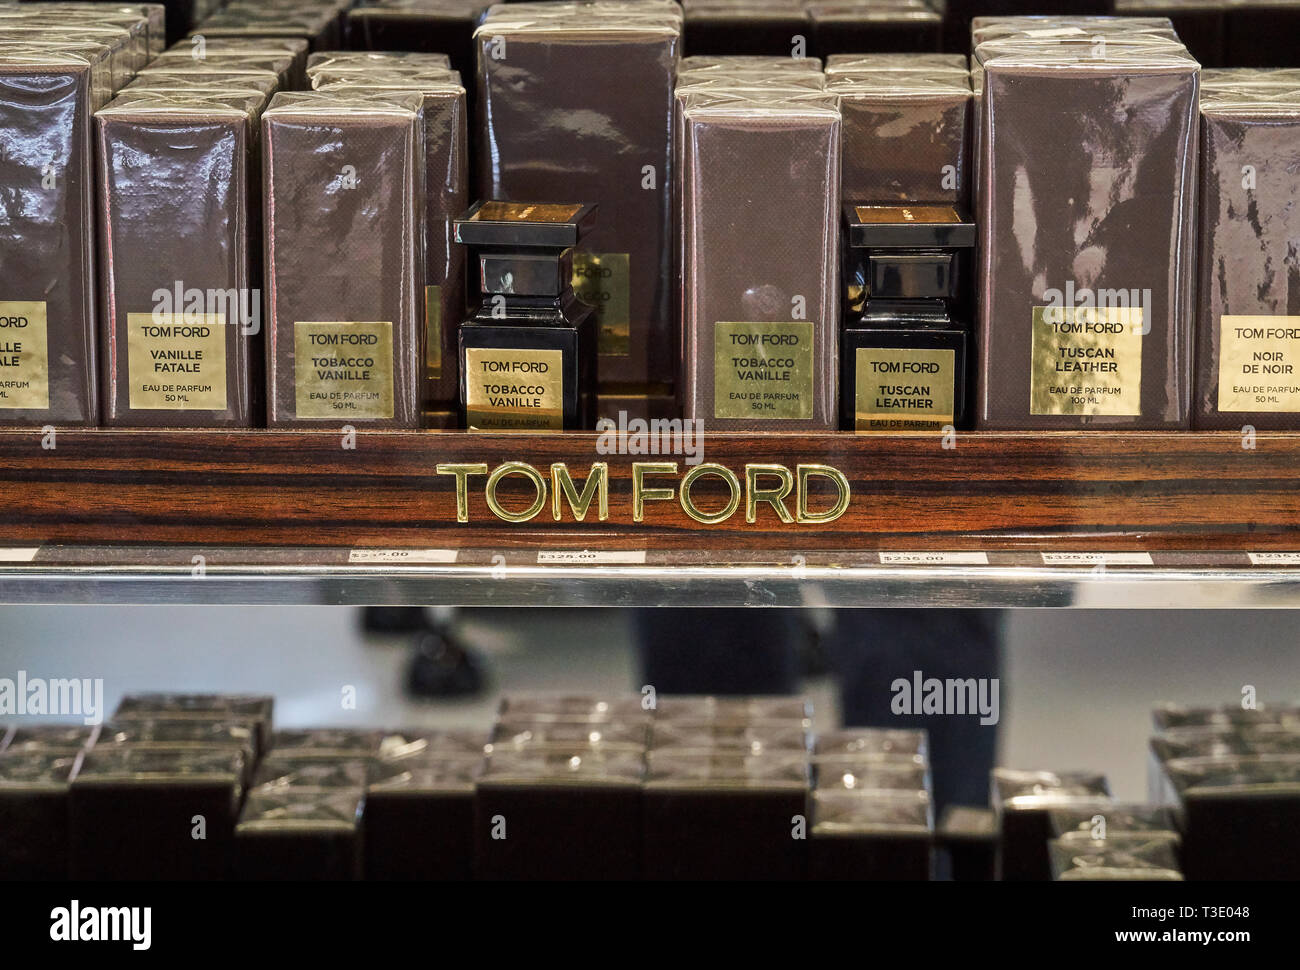 MONTREAL, CANADA - DECEMBER 8, 2018: Tom Ford perfumes stand in YUL Montreal airport. Thomas Carlyle Ford known as Tom Ford is an American fashion des Stock Photo